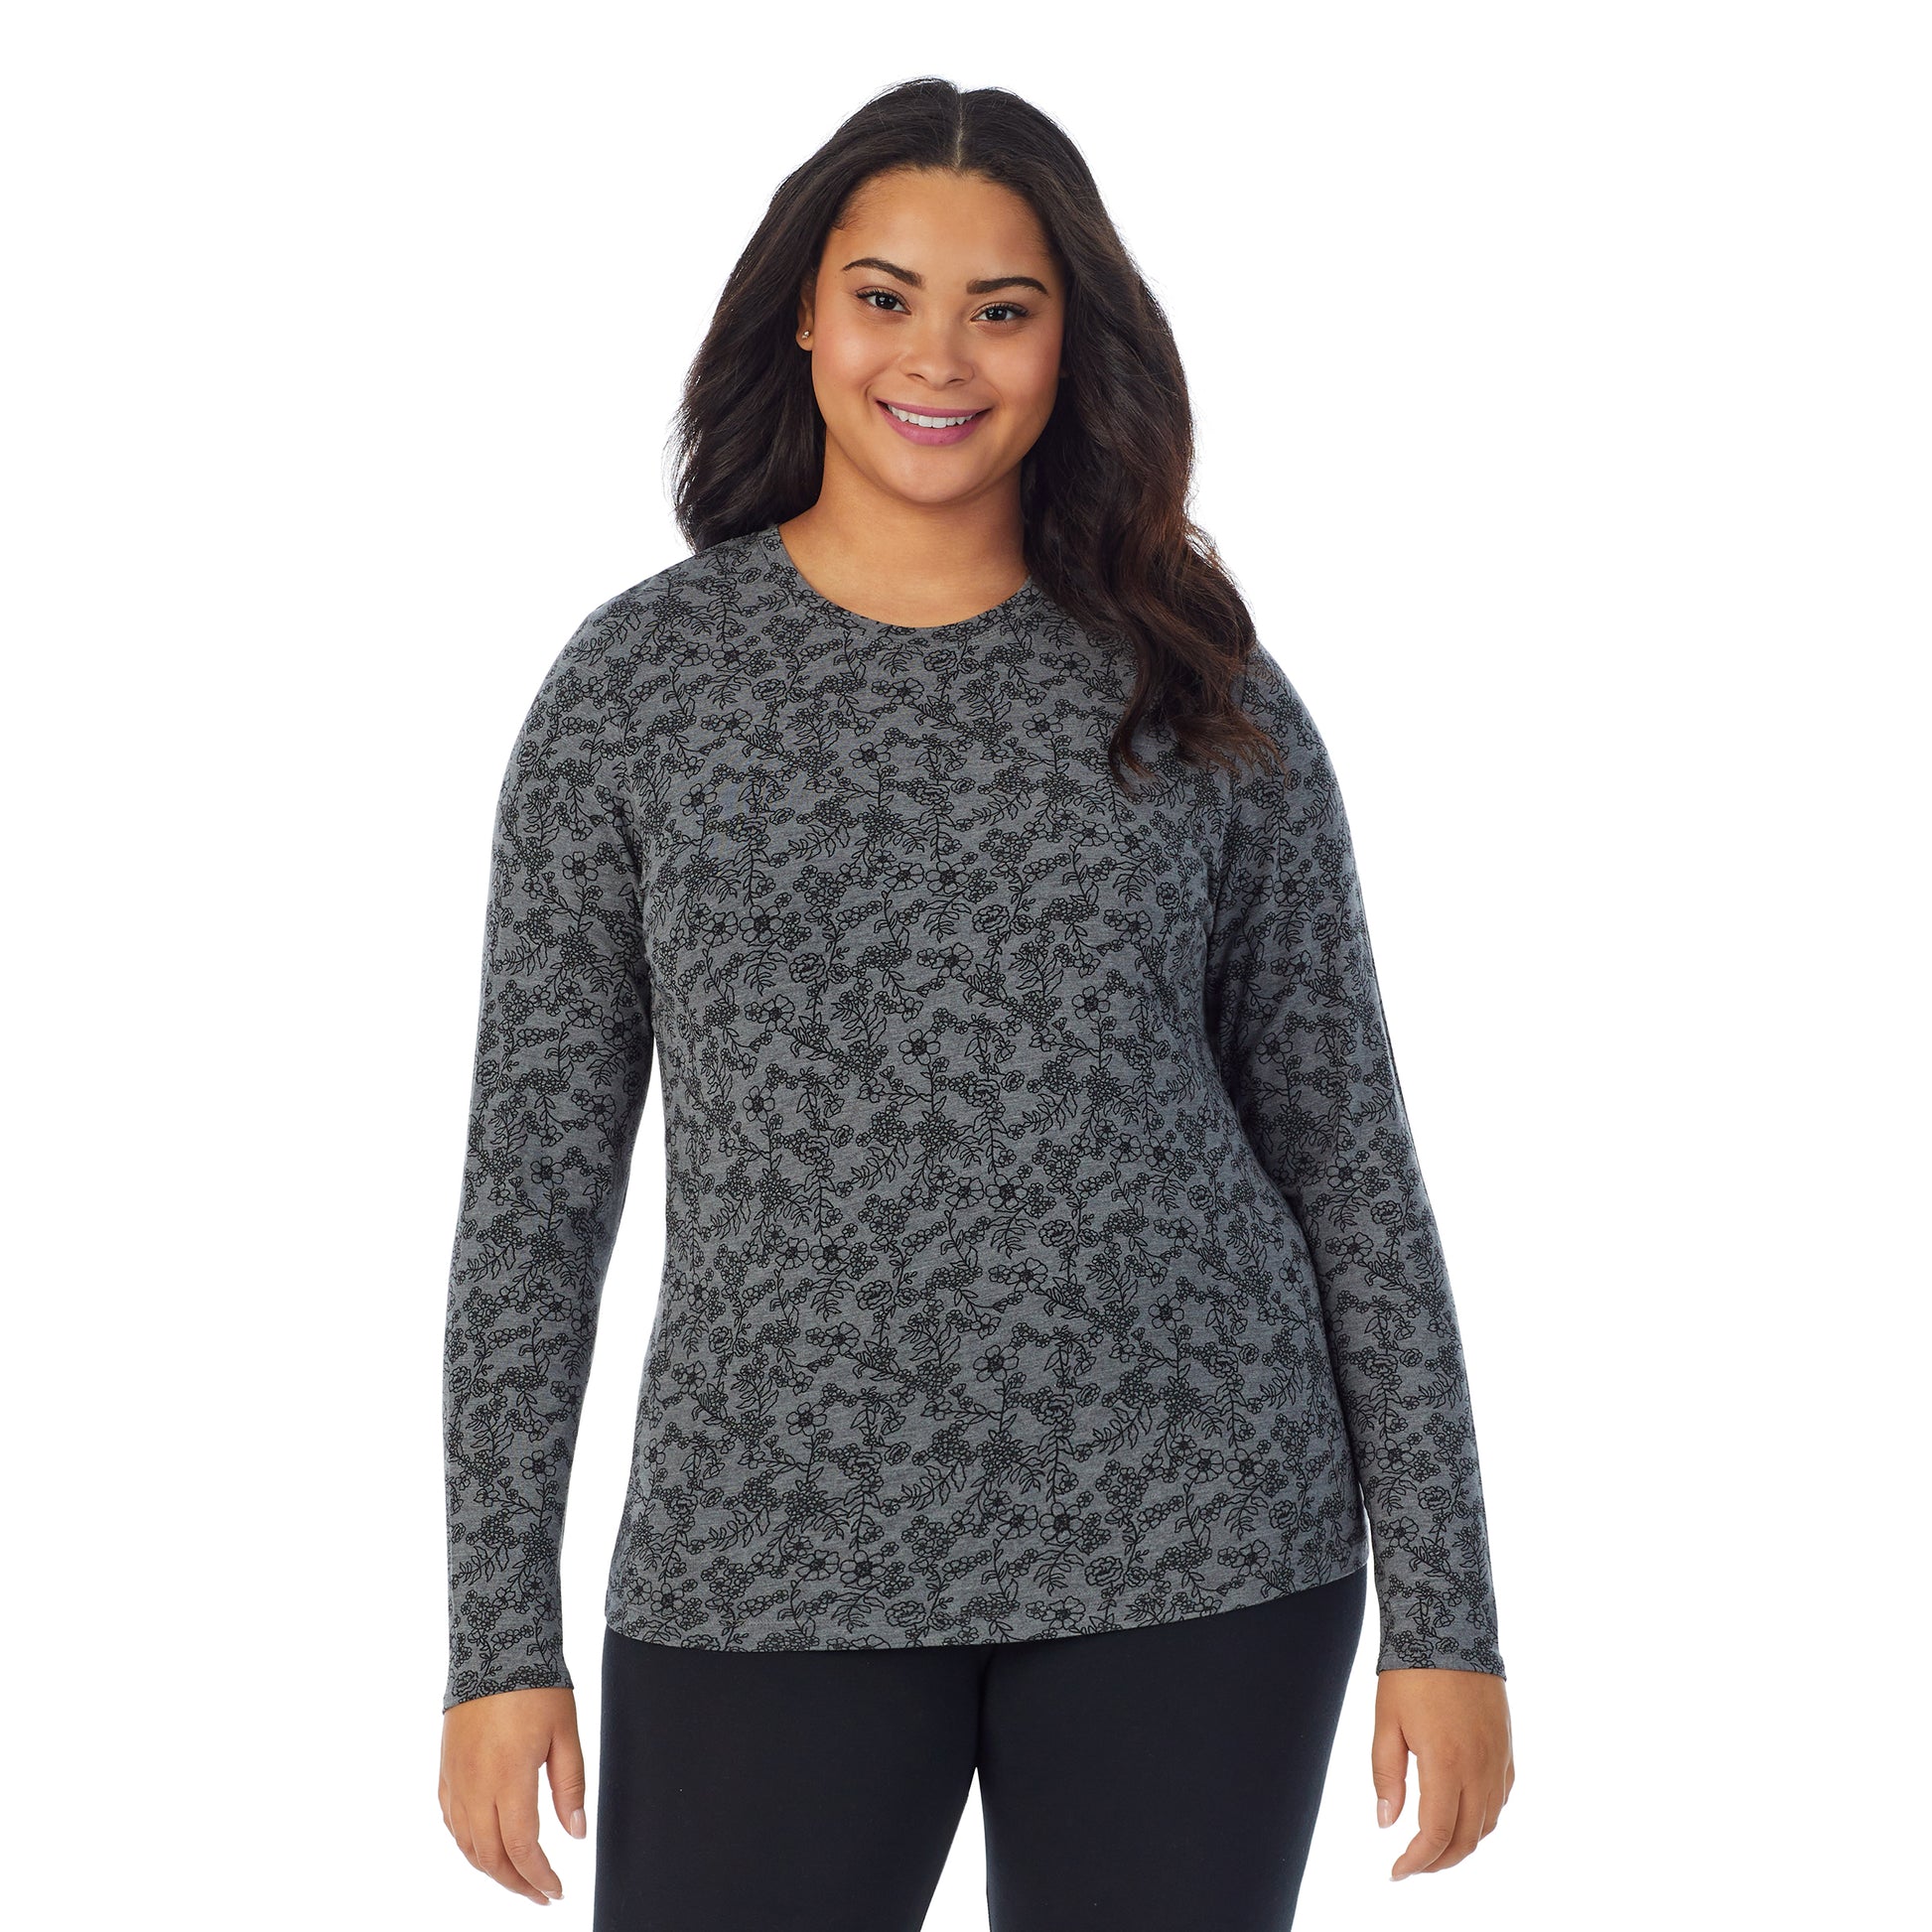 Heather Grey Floral; Model is wearing size 1X. She is 5'11", Bust 36", Waist 36.5", Hips 47.5".@A lady wearing a heather grey floral long sleeve stretch crew plus.